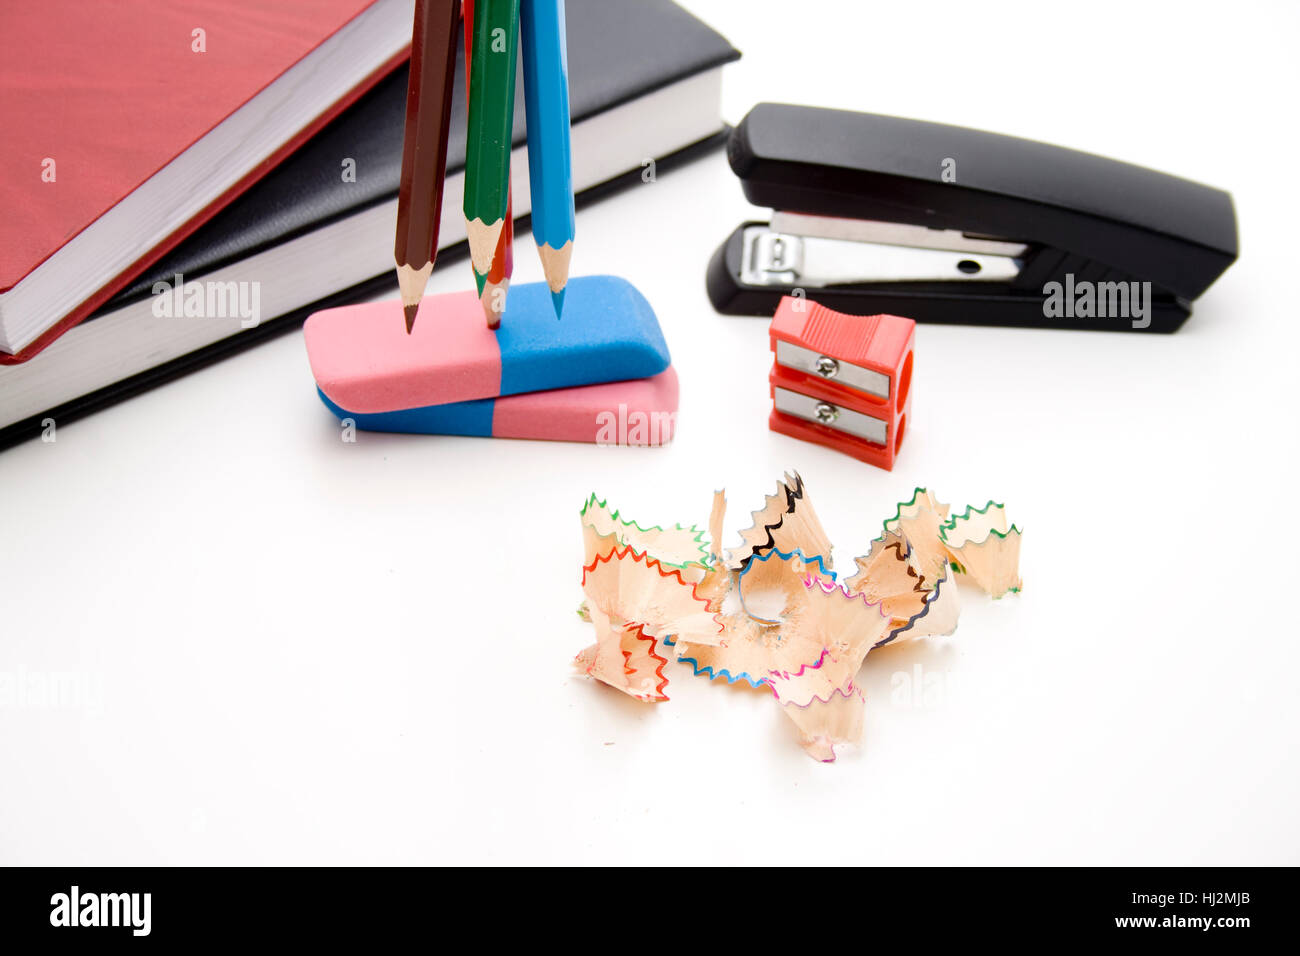 object, coloured, paint, colored pencils, draw, sharpener, eraser, notebook, Stock Photo